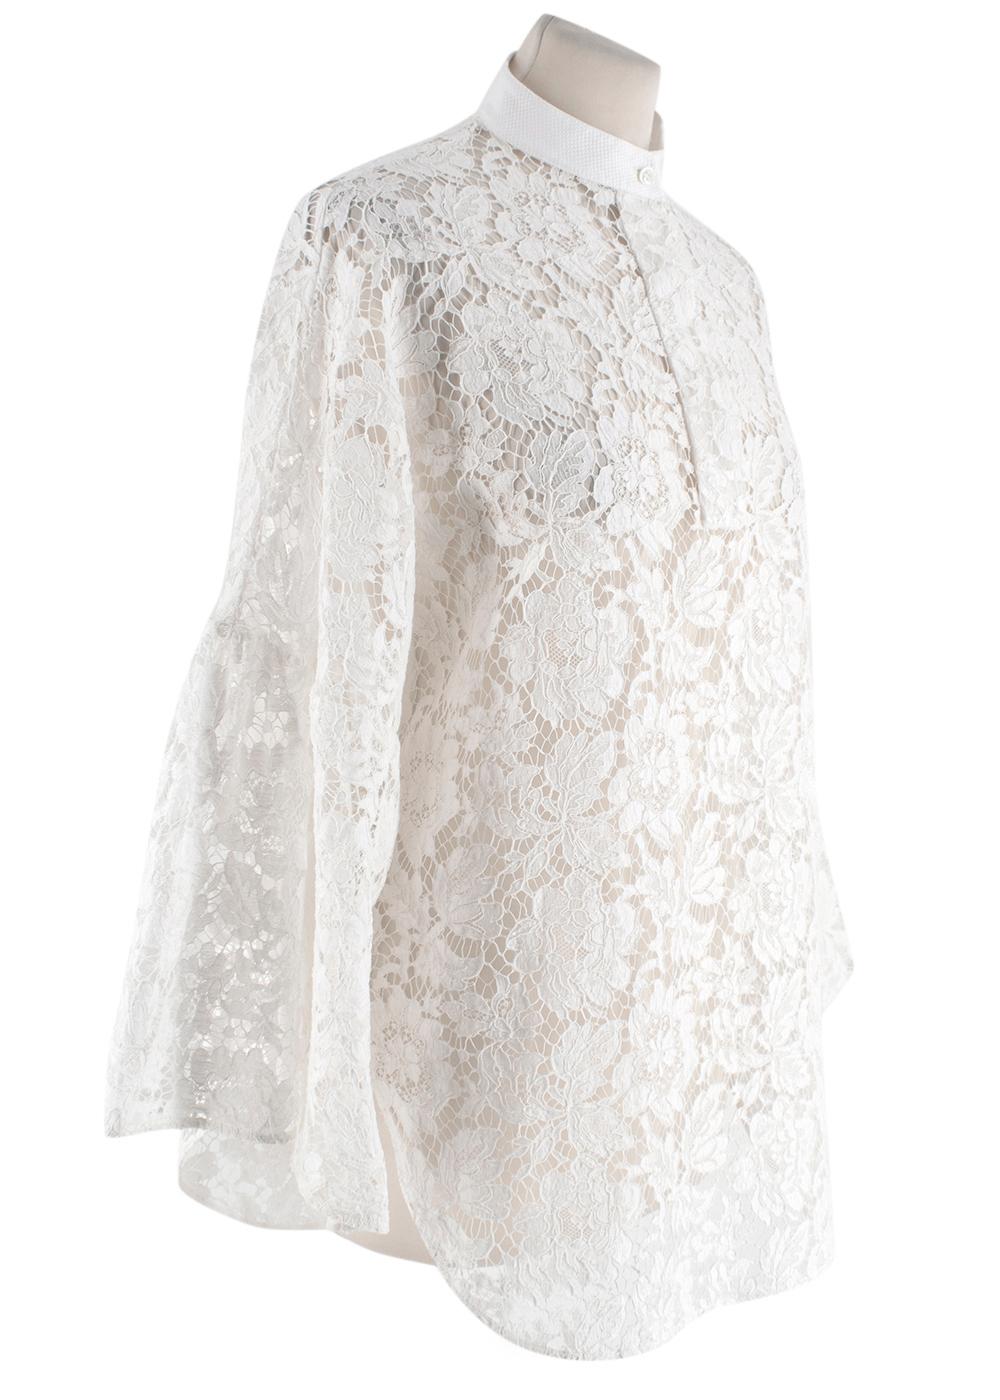 Valentino White Lace Cotton Blend Blouse

- Button up detail at collar 
- Whte Collar 
- Wide Sleeves
- High Neckline 
- Rounded Hemline with side slits 
- Flared Sleeve 

Materials 
71% Cotton
21% Viscose
8% Polyamide 

Dry Clean Only 

Made in